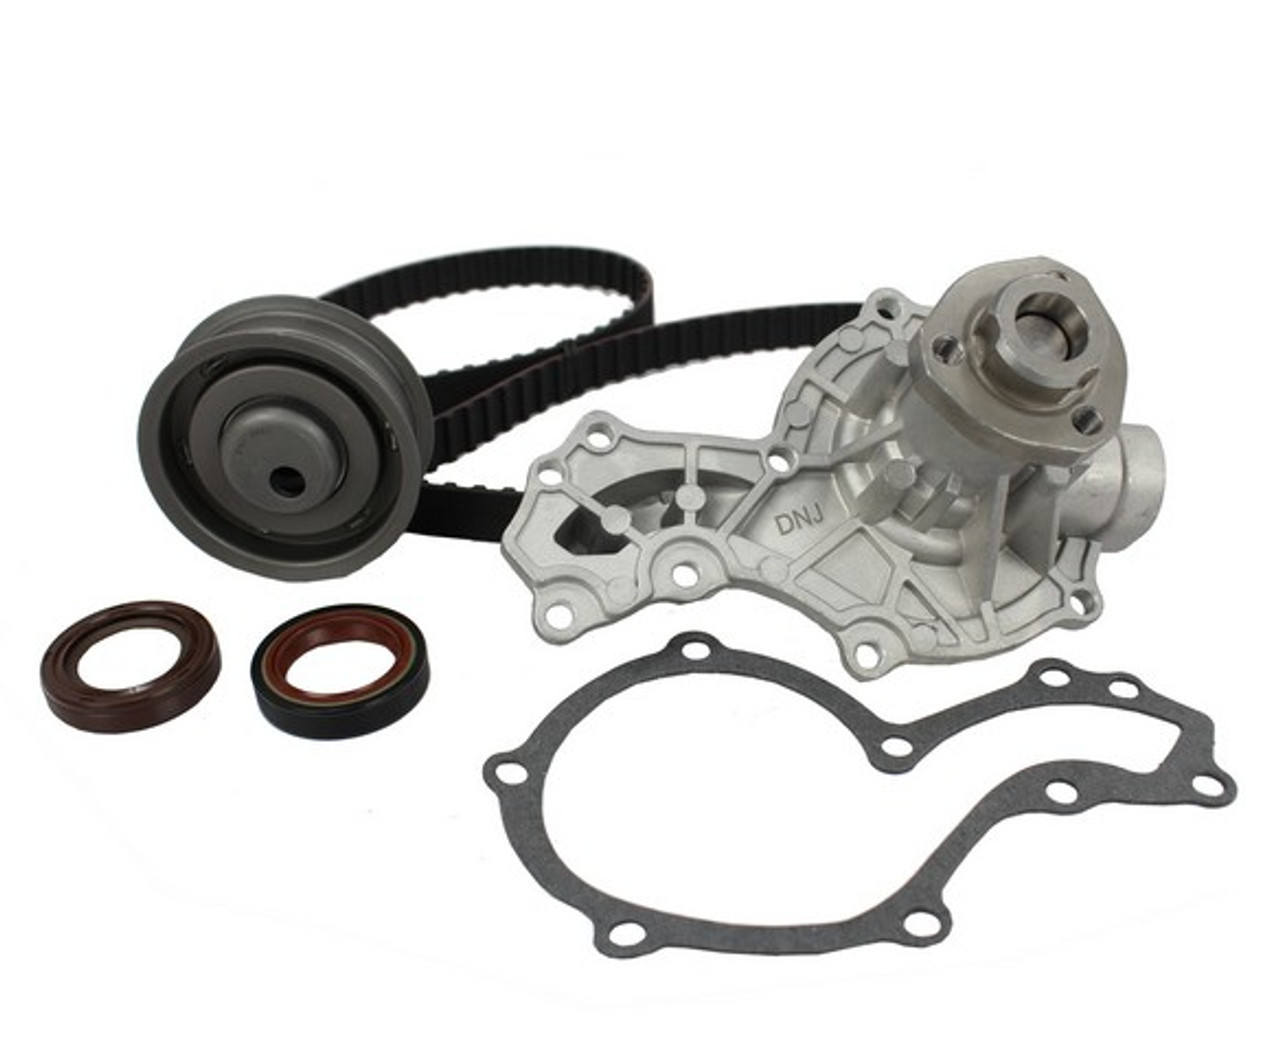 Timing Belt Kit with Water Pump 2.0L 1998 Volkswagen Golf - TBK803WP.14